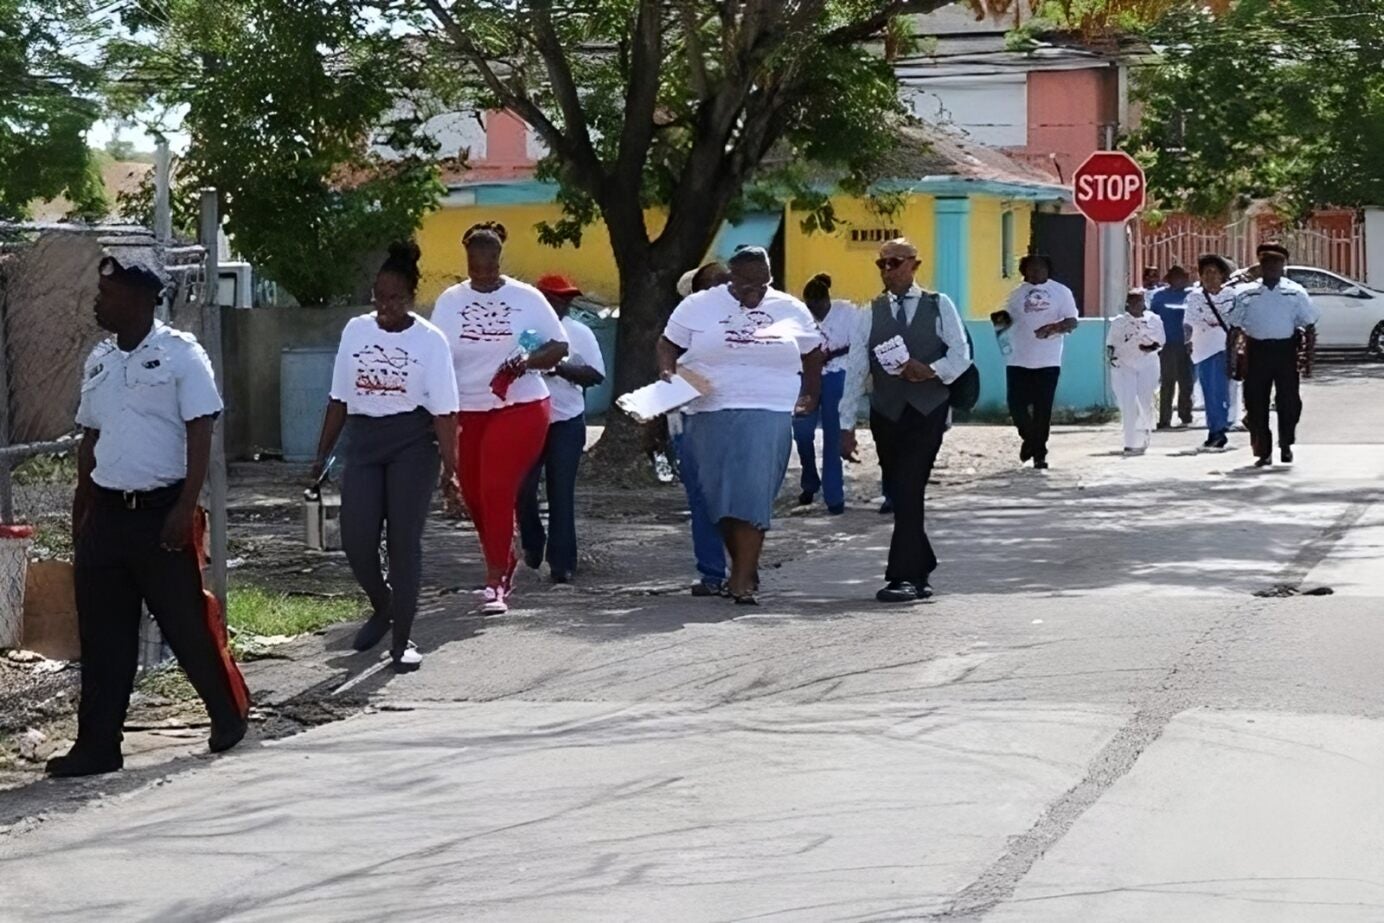 Nurses Organized Walkabout to Promote Vaccination in Communities 